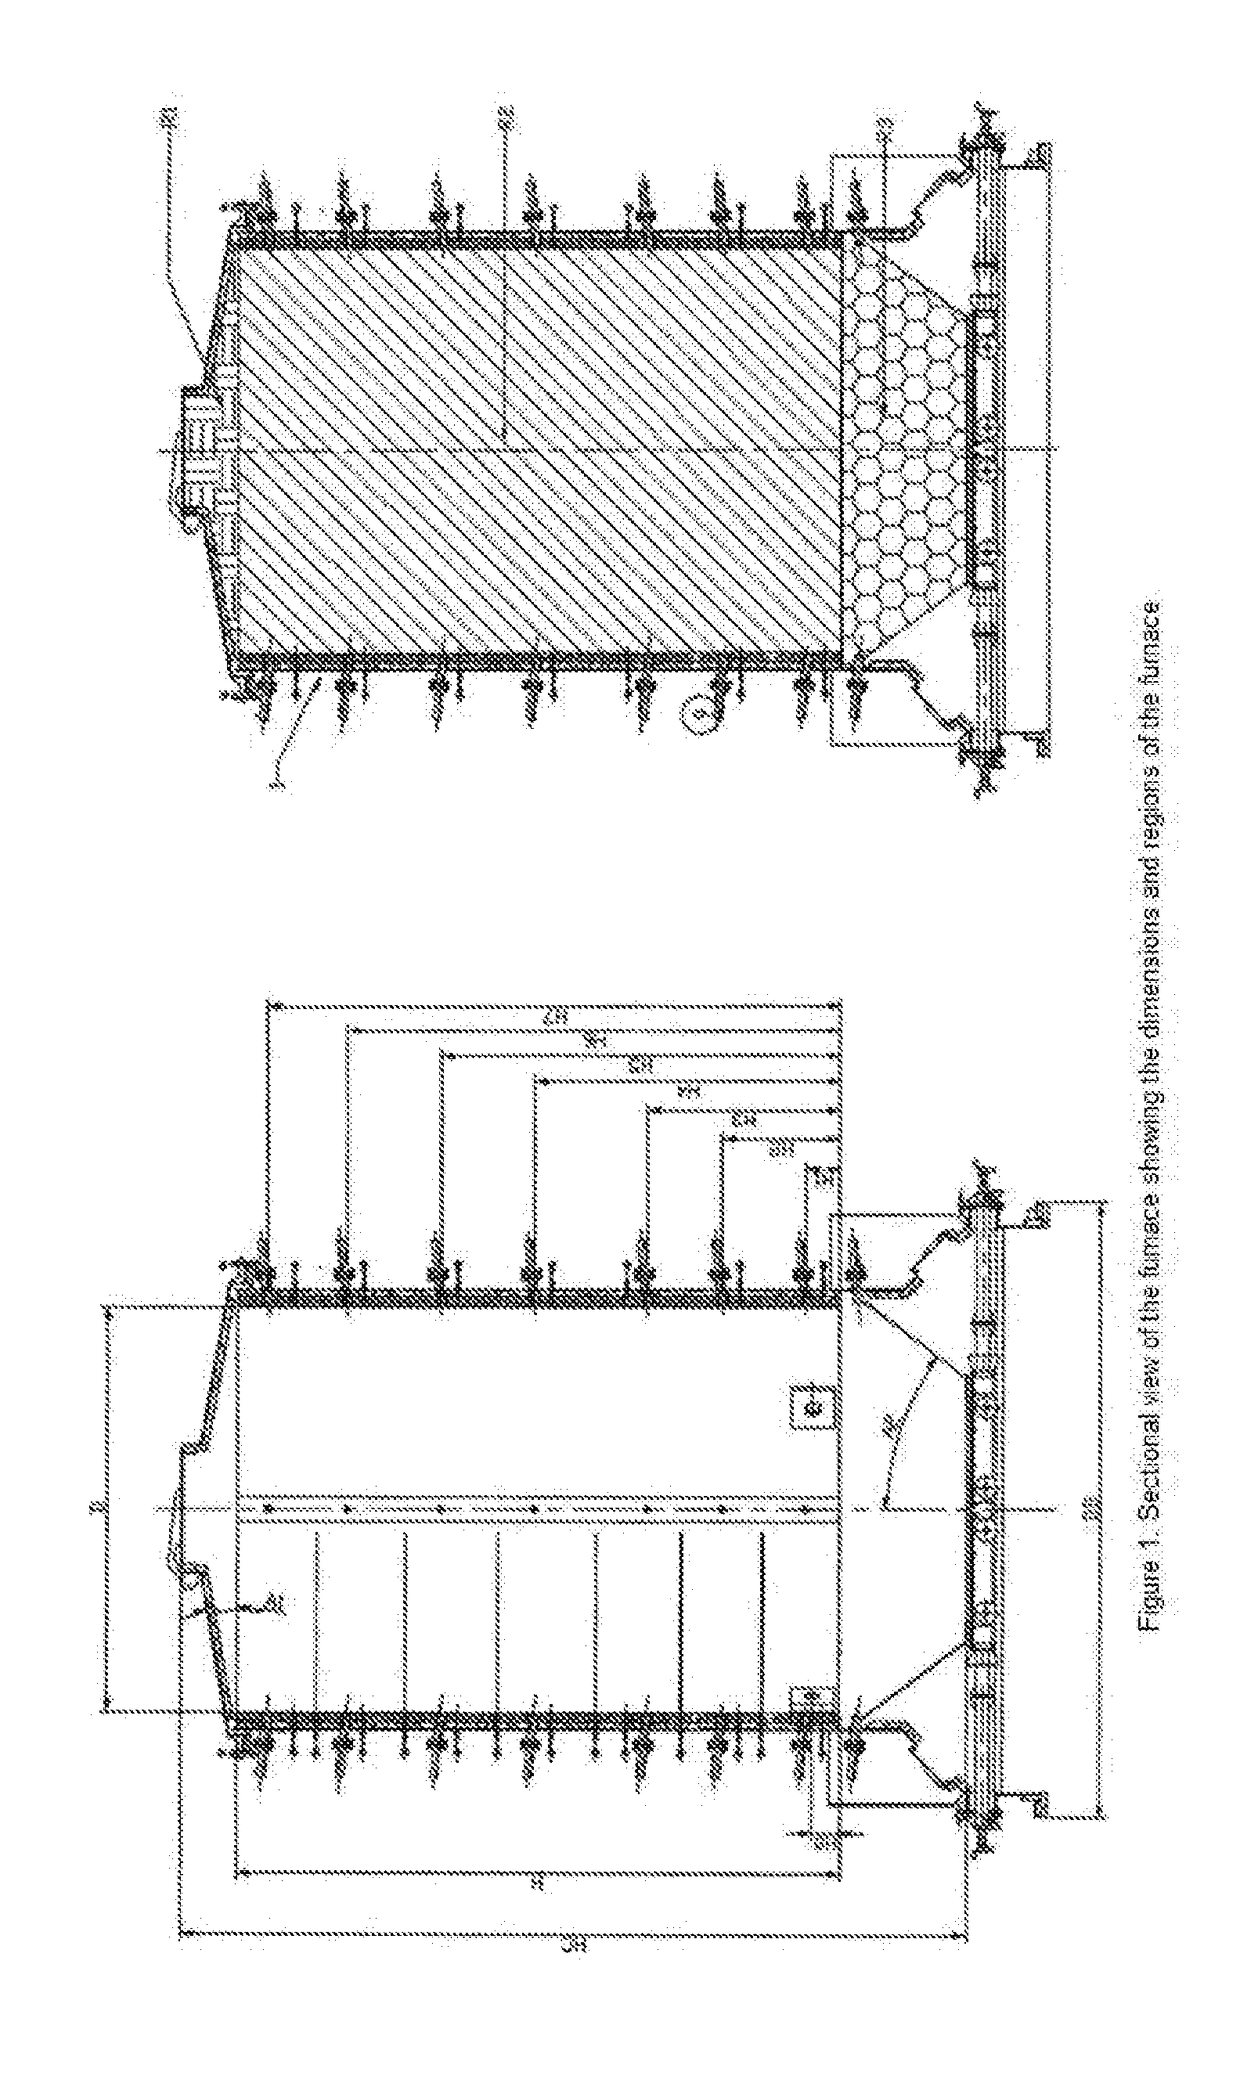 Industrial process using a forced-exhaust metal furnace and mechanisms developed for simultaneously producing coal, fuel gas, pyroligneous extract and tar